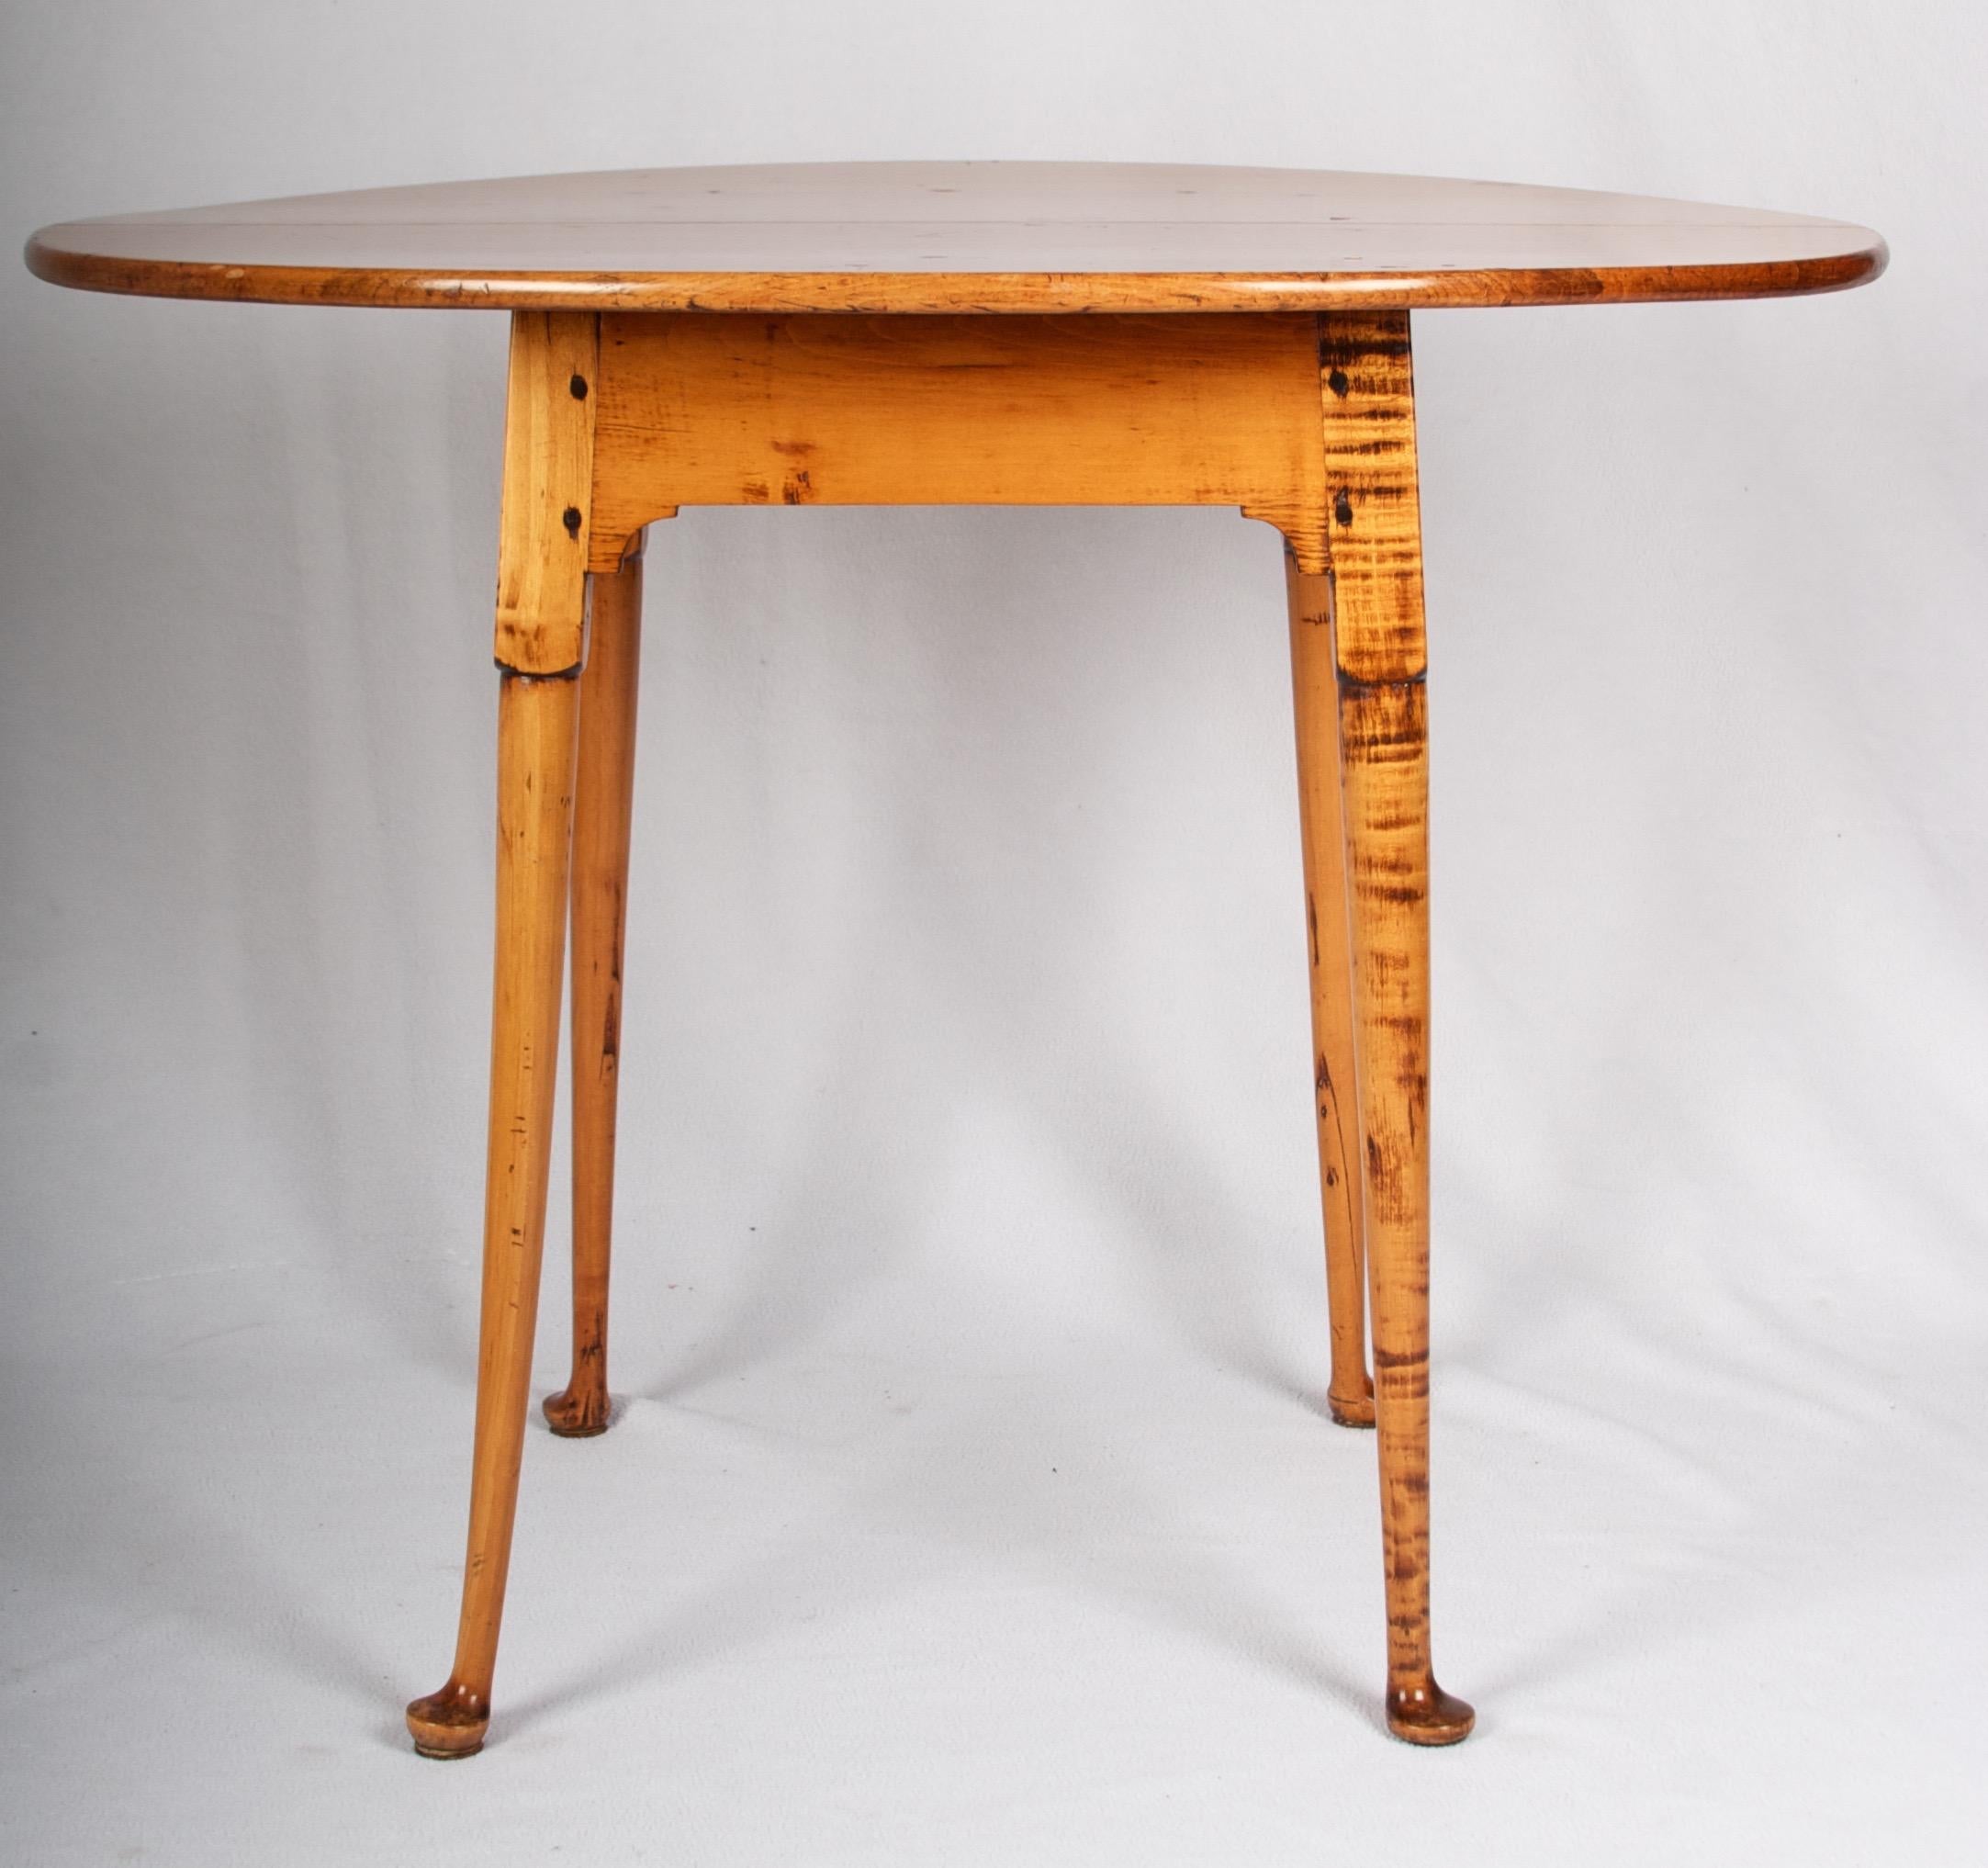 A beautiful tiger maple tavern table from the late 18th century, handmade in New England.
The legs are pinned with dowels into the frame which supports a split oval top, cut from
choice maple, and affixed also with dowel pins - which are arranged